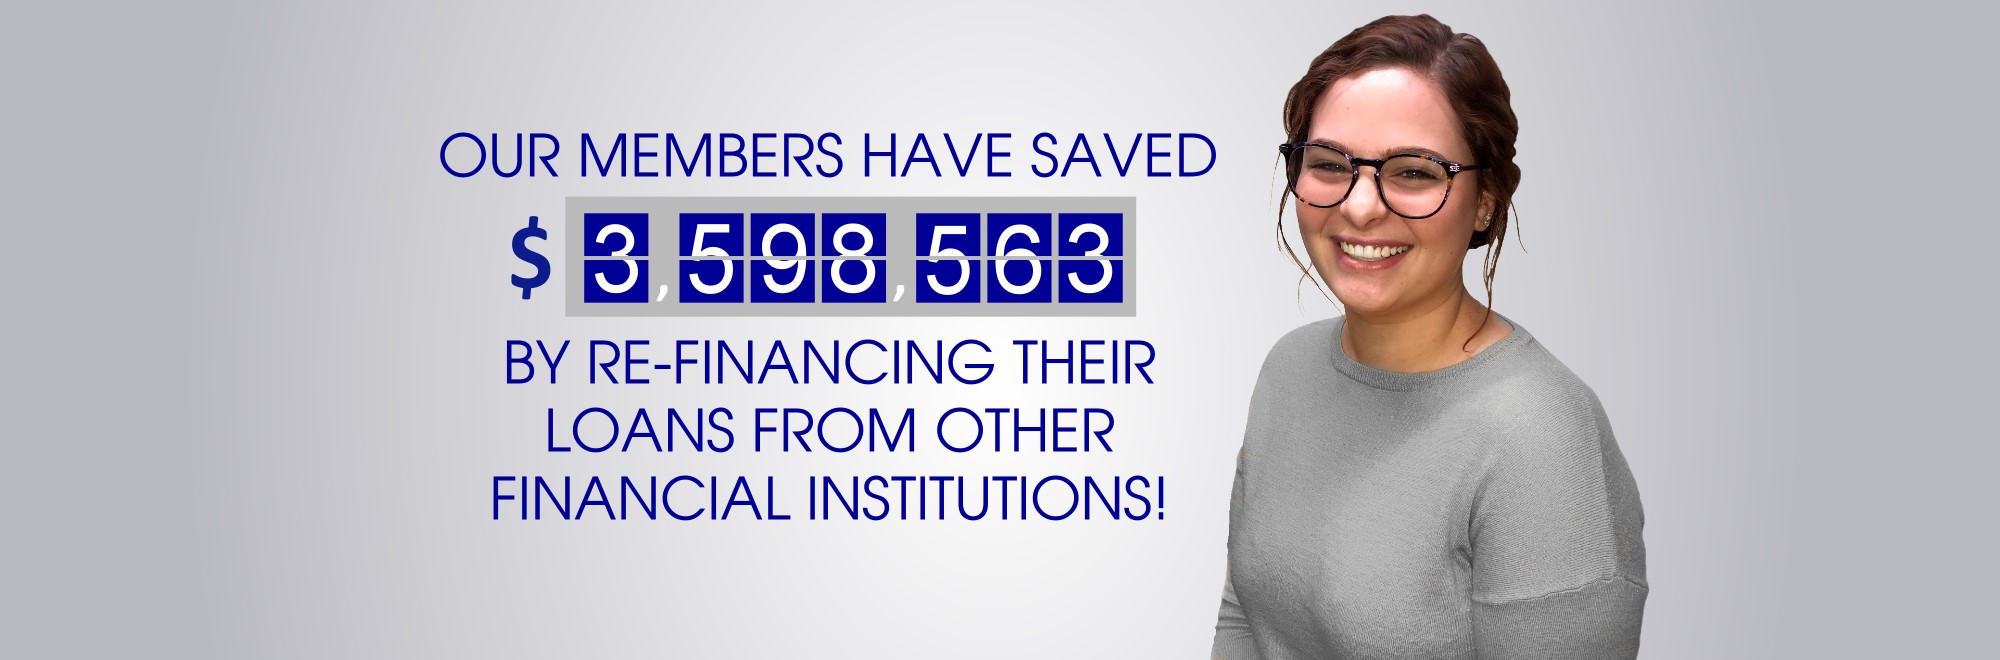 Our members have saved $3,598,563 by re-financing their loans form other financial institutions!